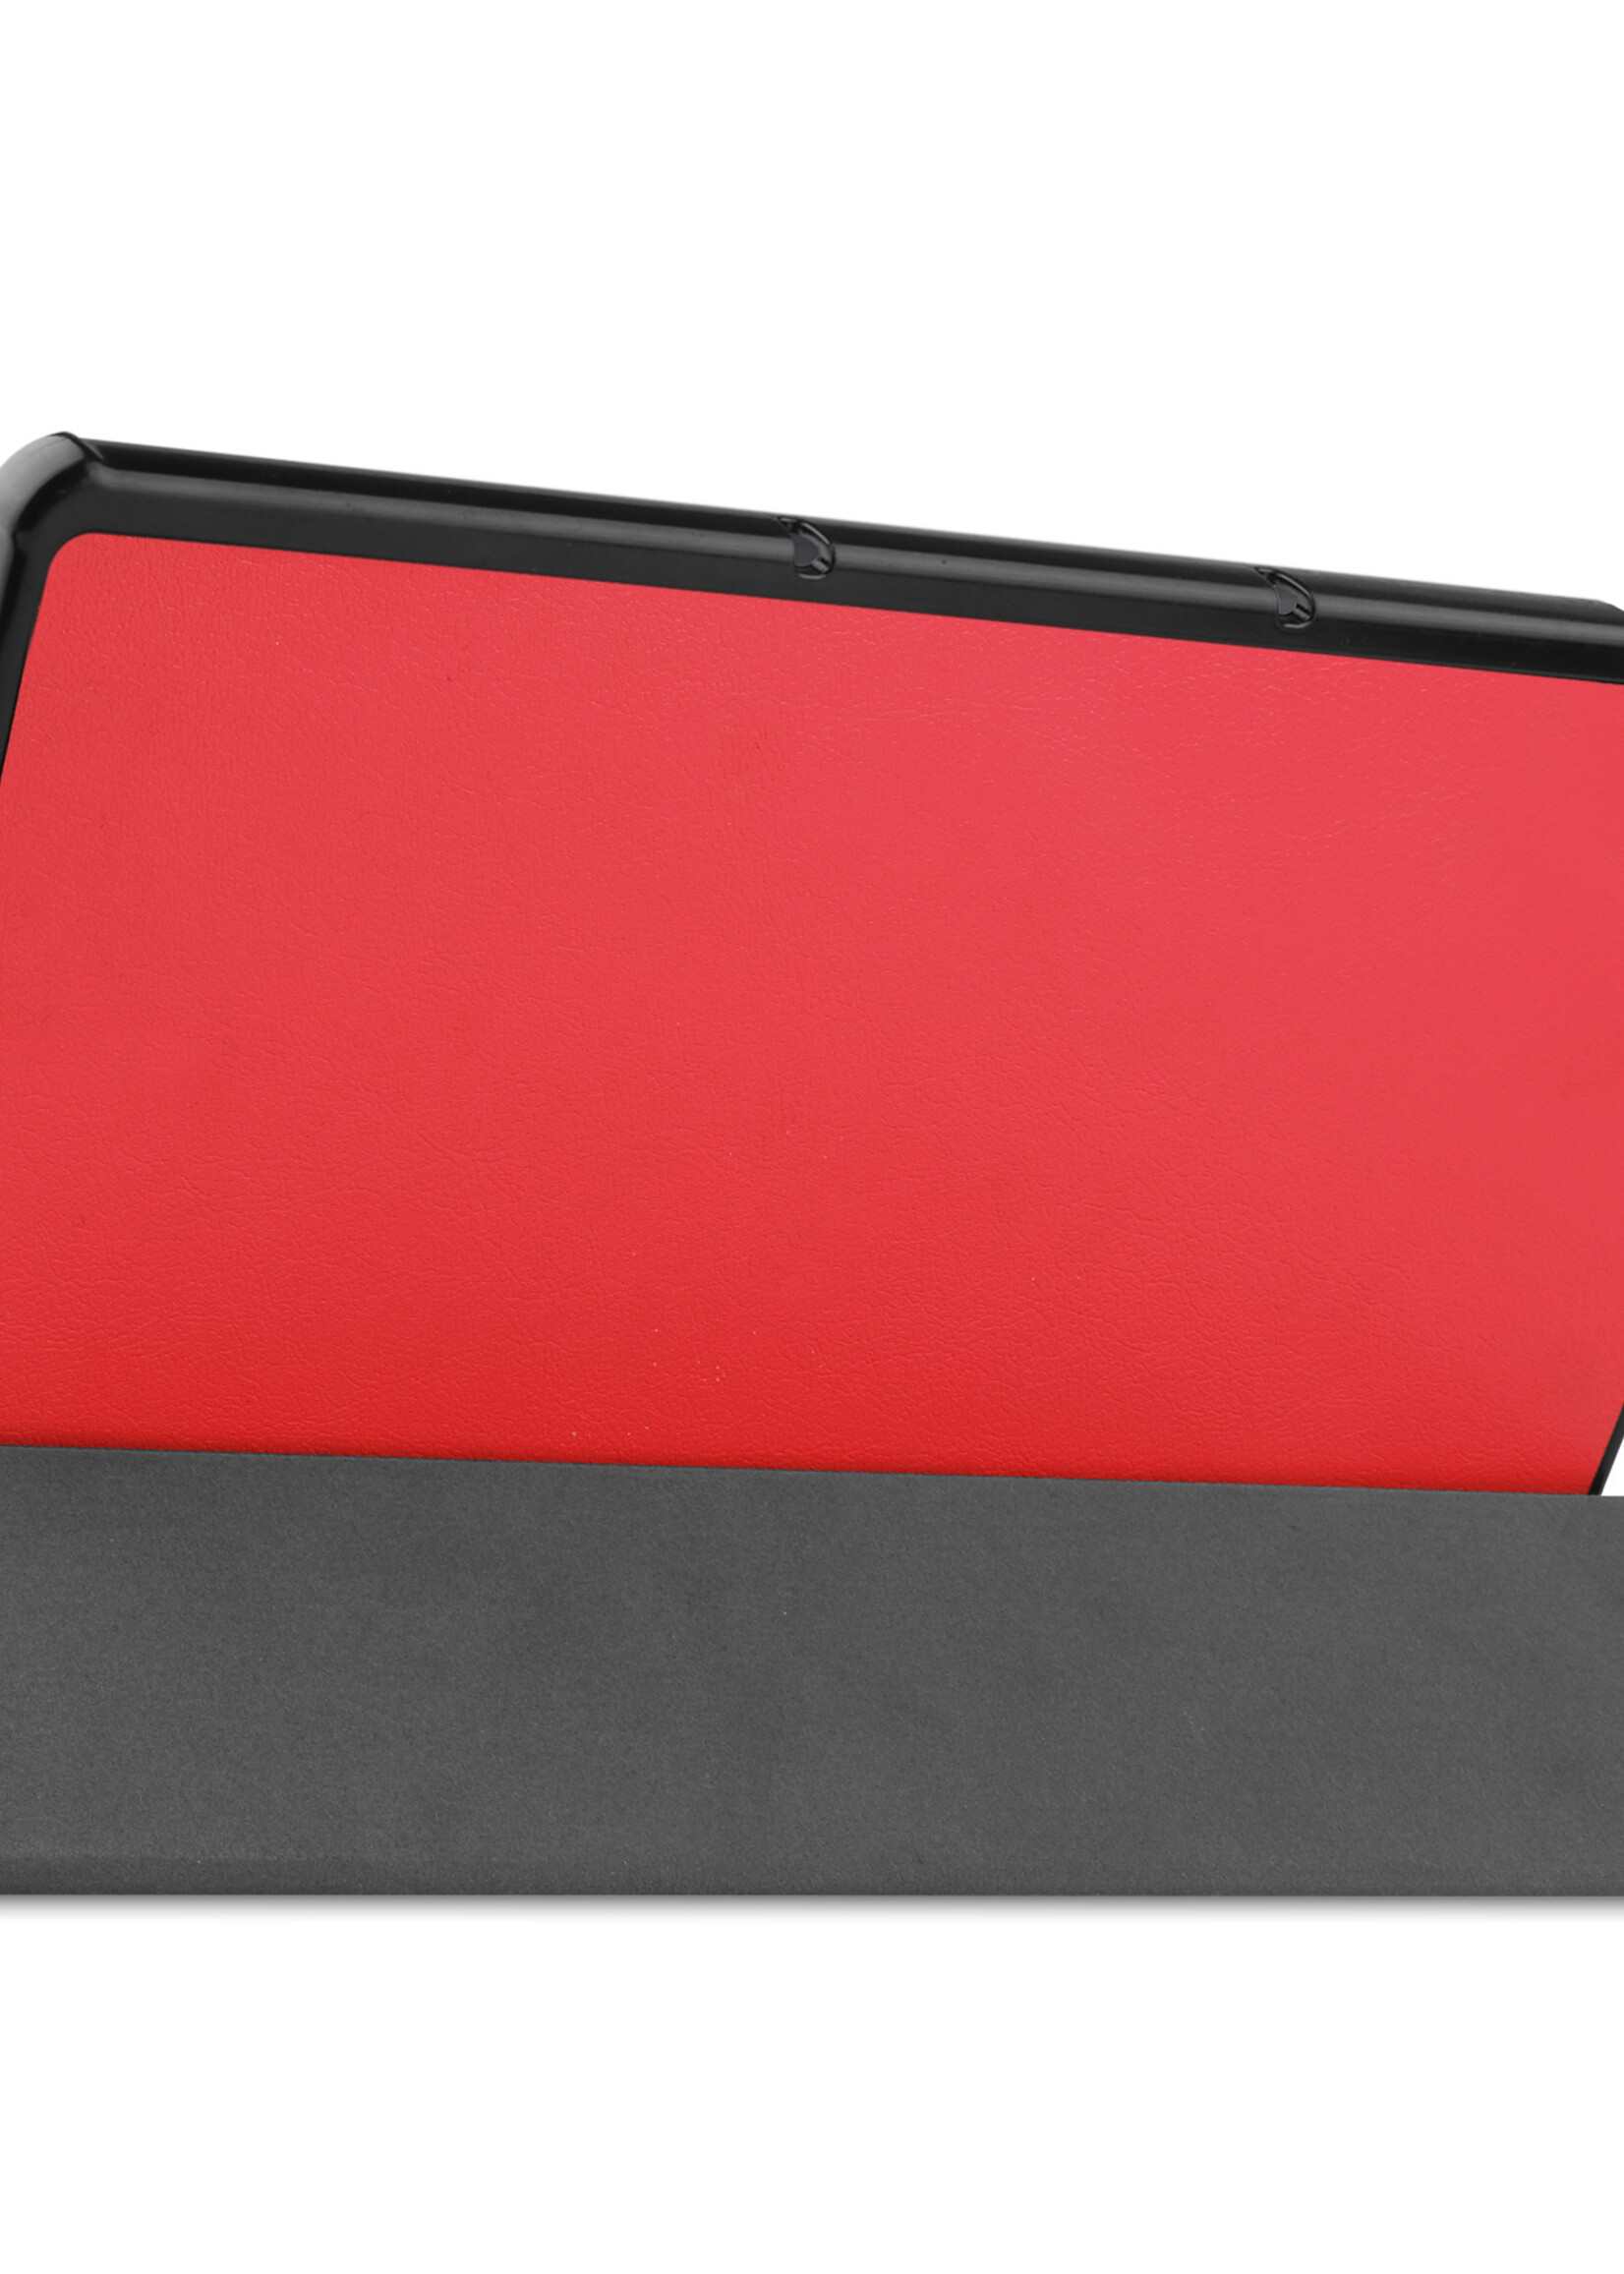 LUQ Hoes Geschikt voor Lenovo Tab P11 Plus Hoes Luxe Hoesje Book Case - Hoesje Geschikt voor Lenovo Tab P11 Plus Hoes Cover - Rood